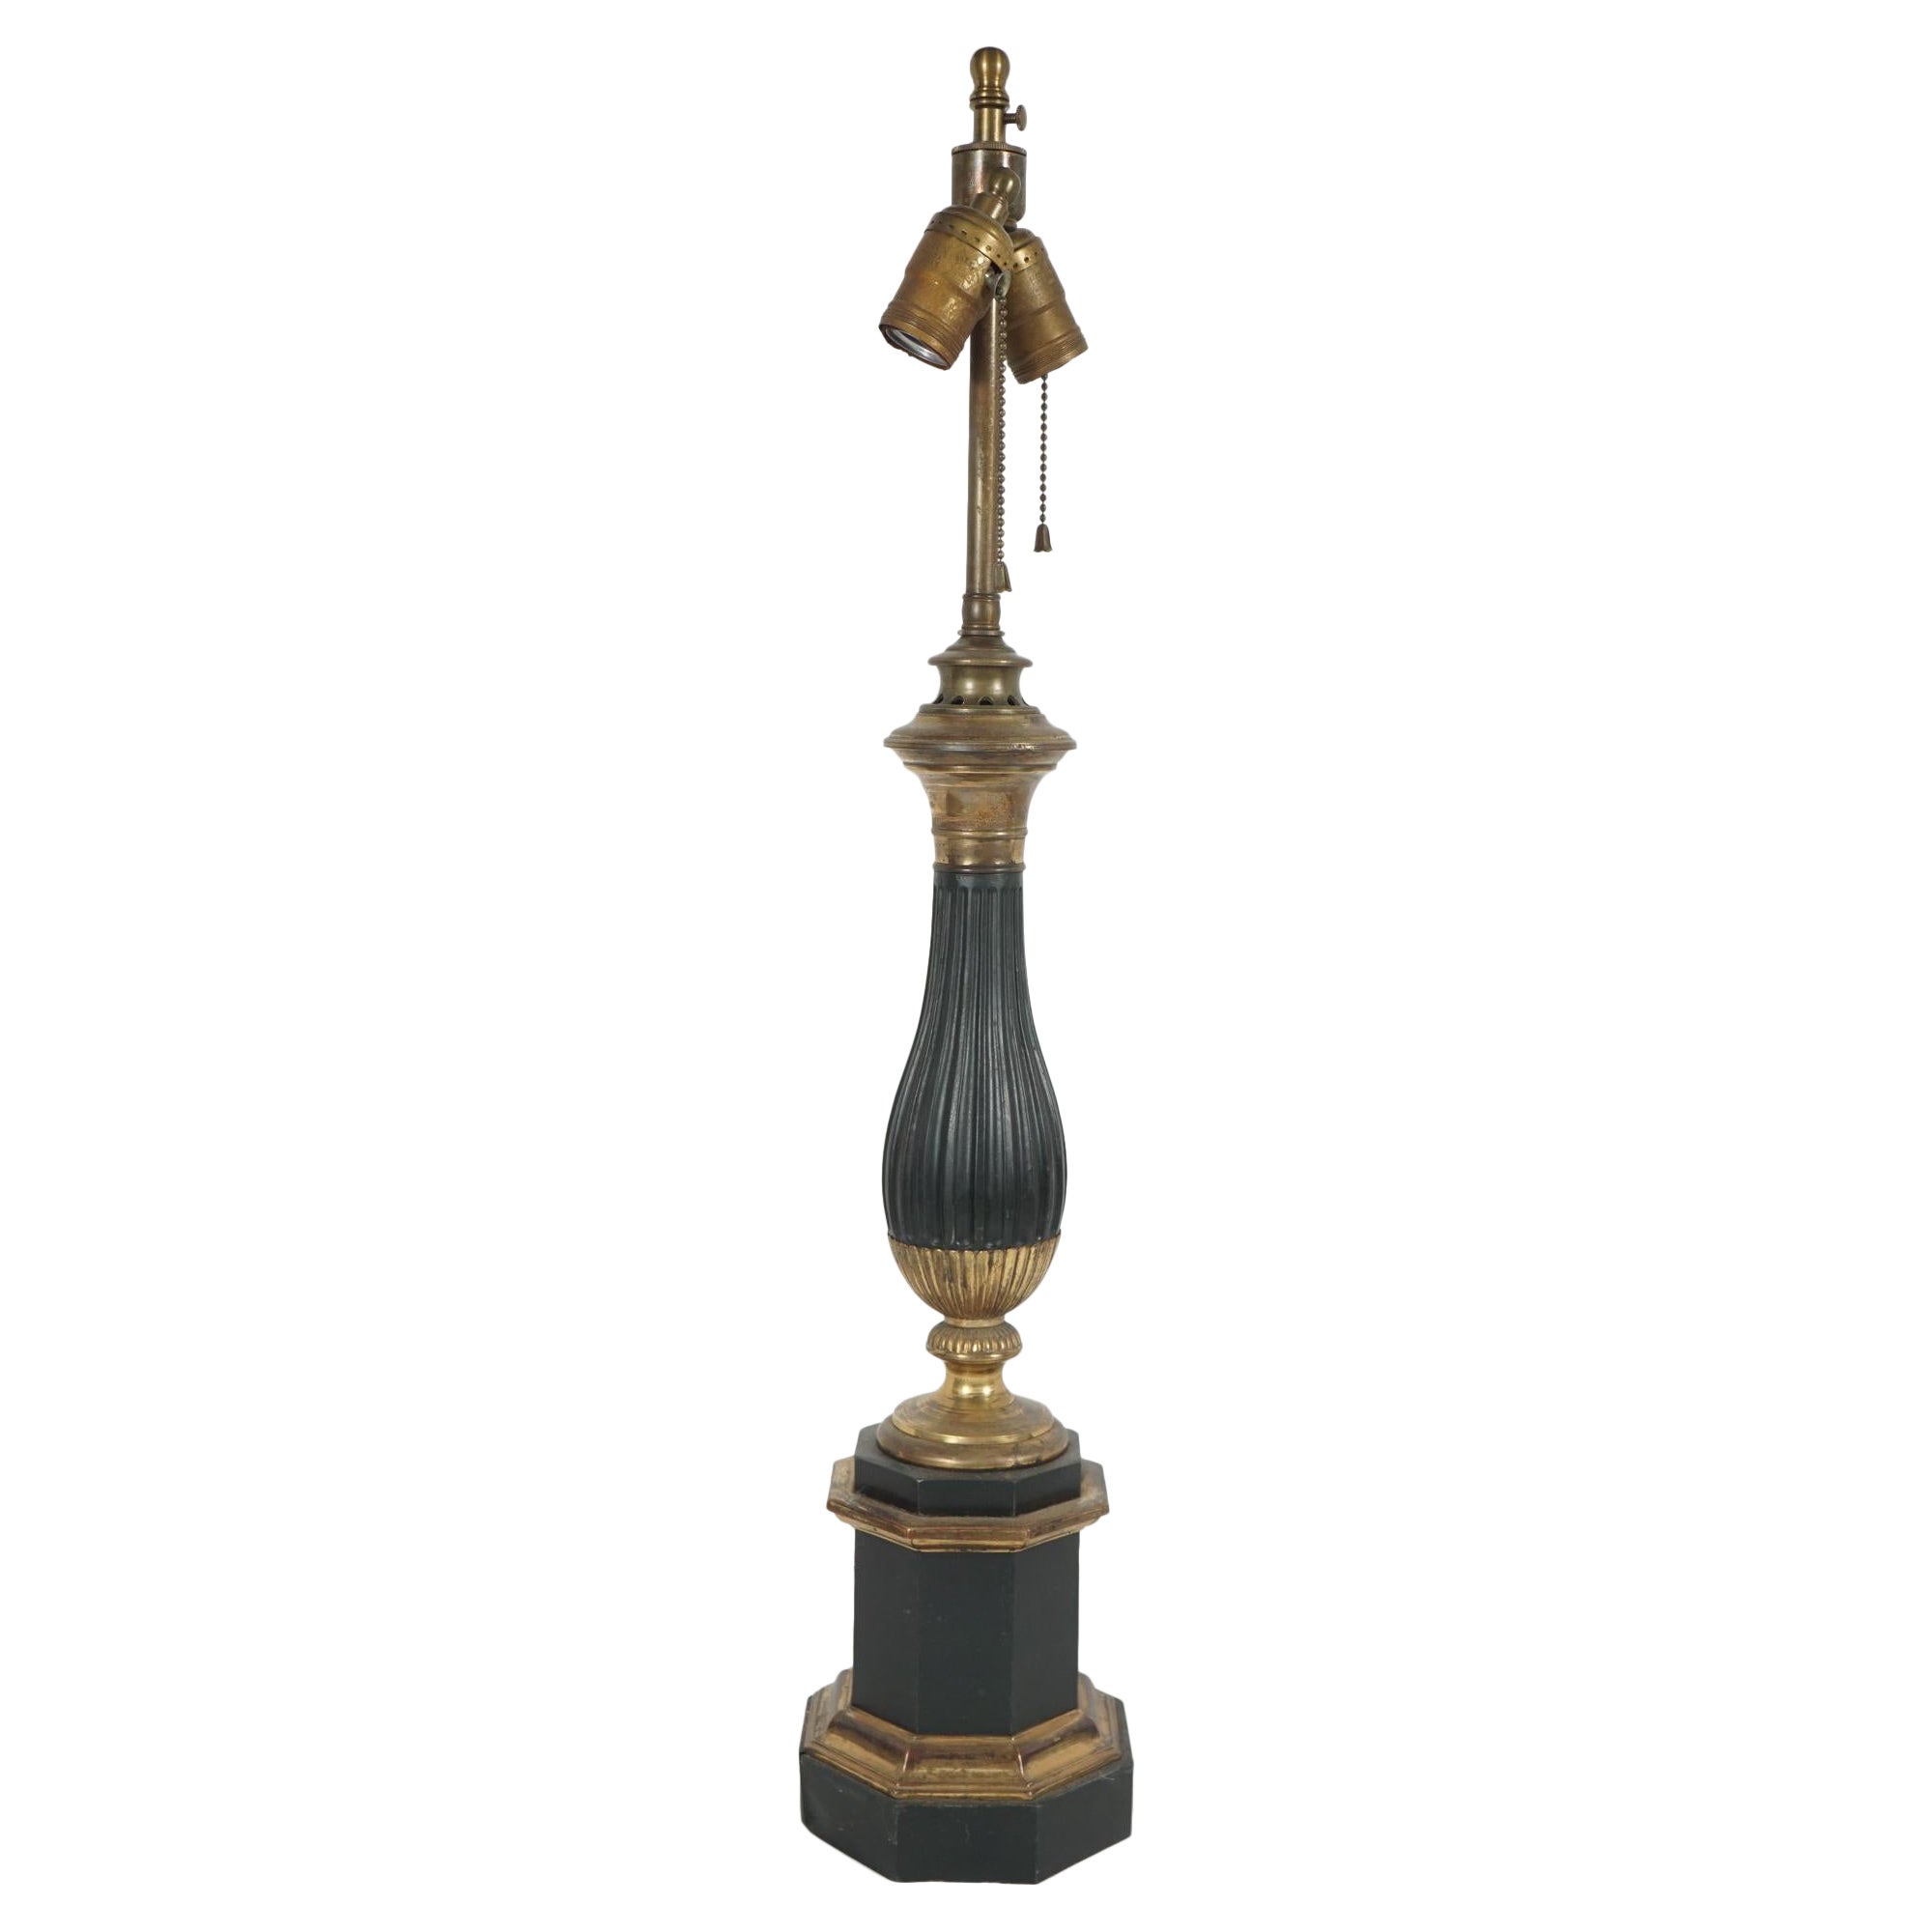 French 19th Century Tole Sinumbra or Carcel Lamp from the Estate of Bunny Mellon For Sale